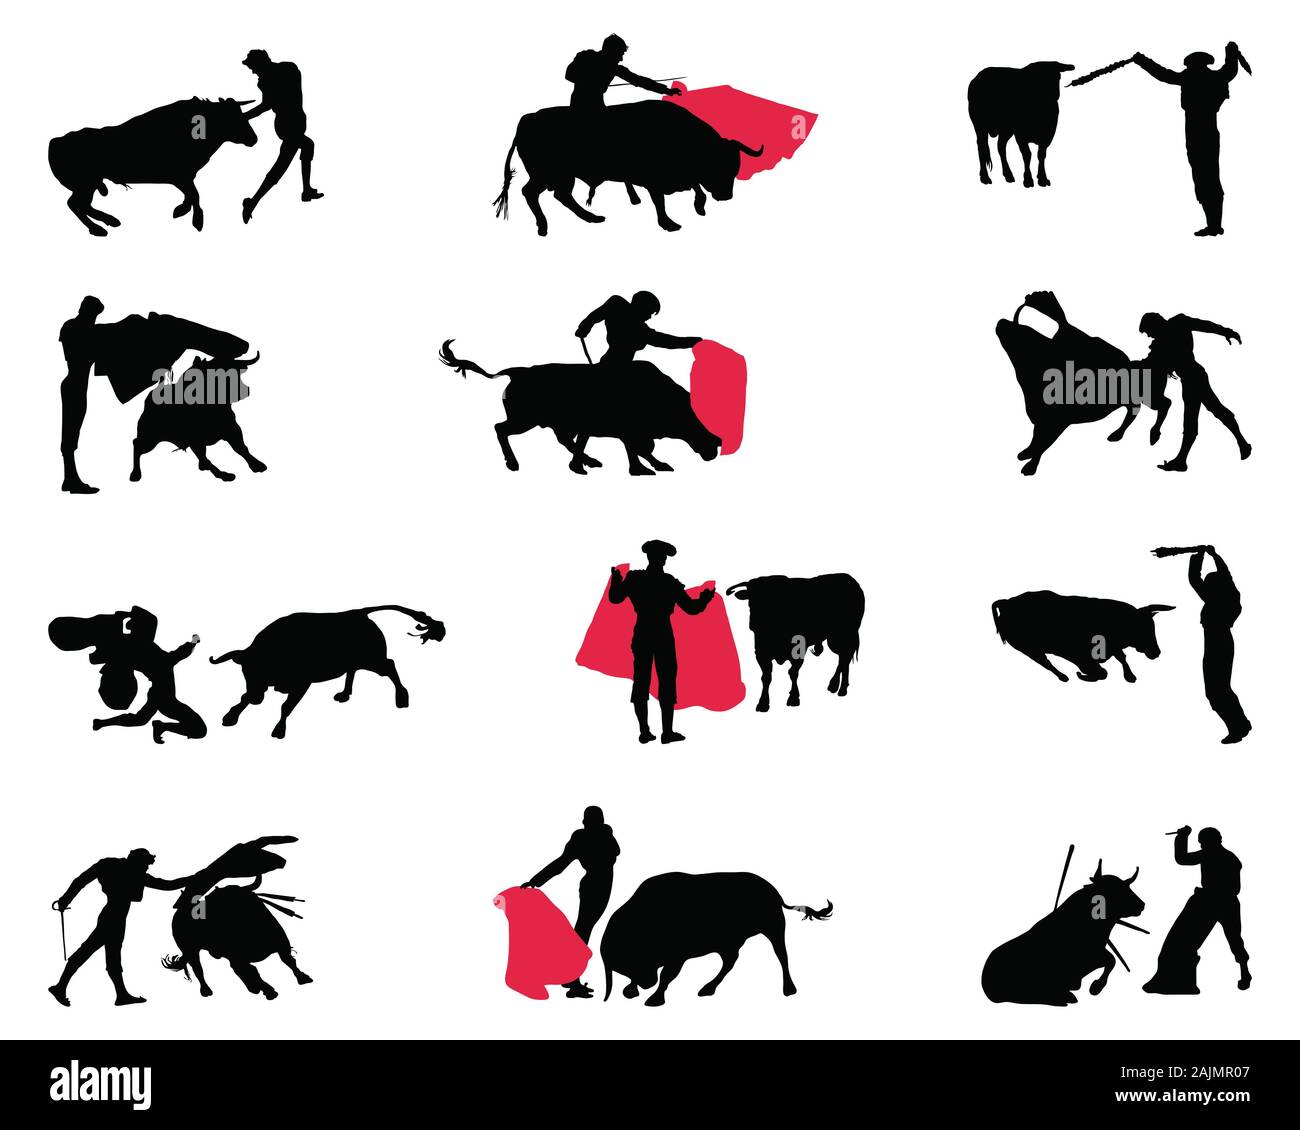 Black silhouettes of matadors and bulls on a white background, vector Stock Photo